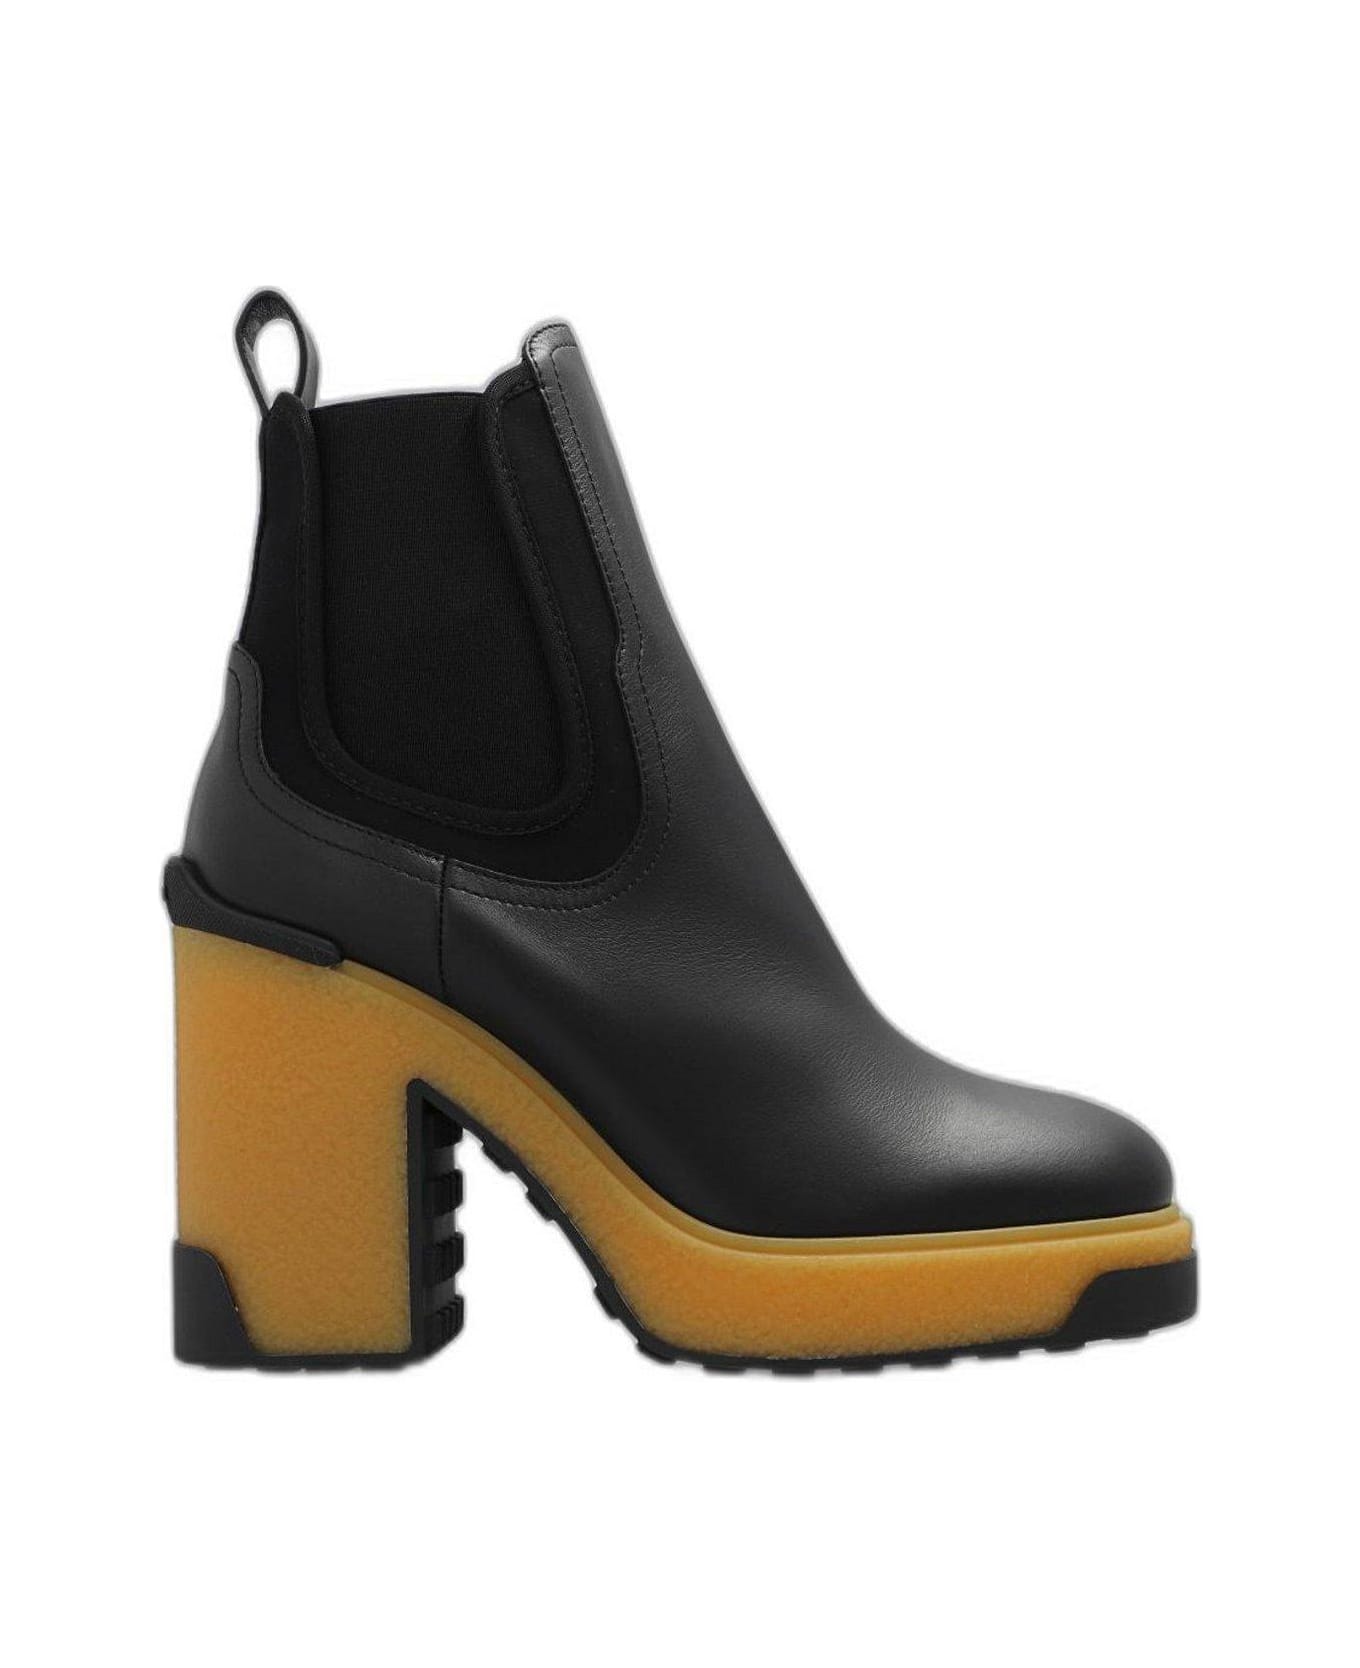 Moncler Isla Heeled Ankle Boots - Black ブーツ